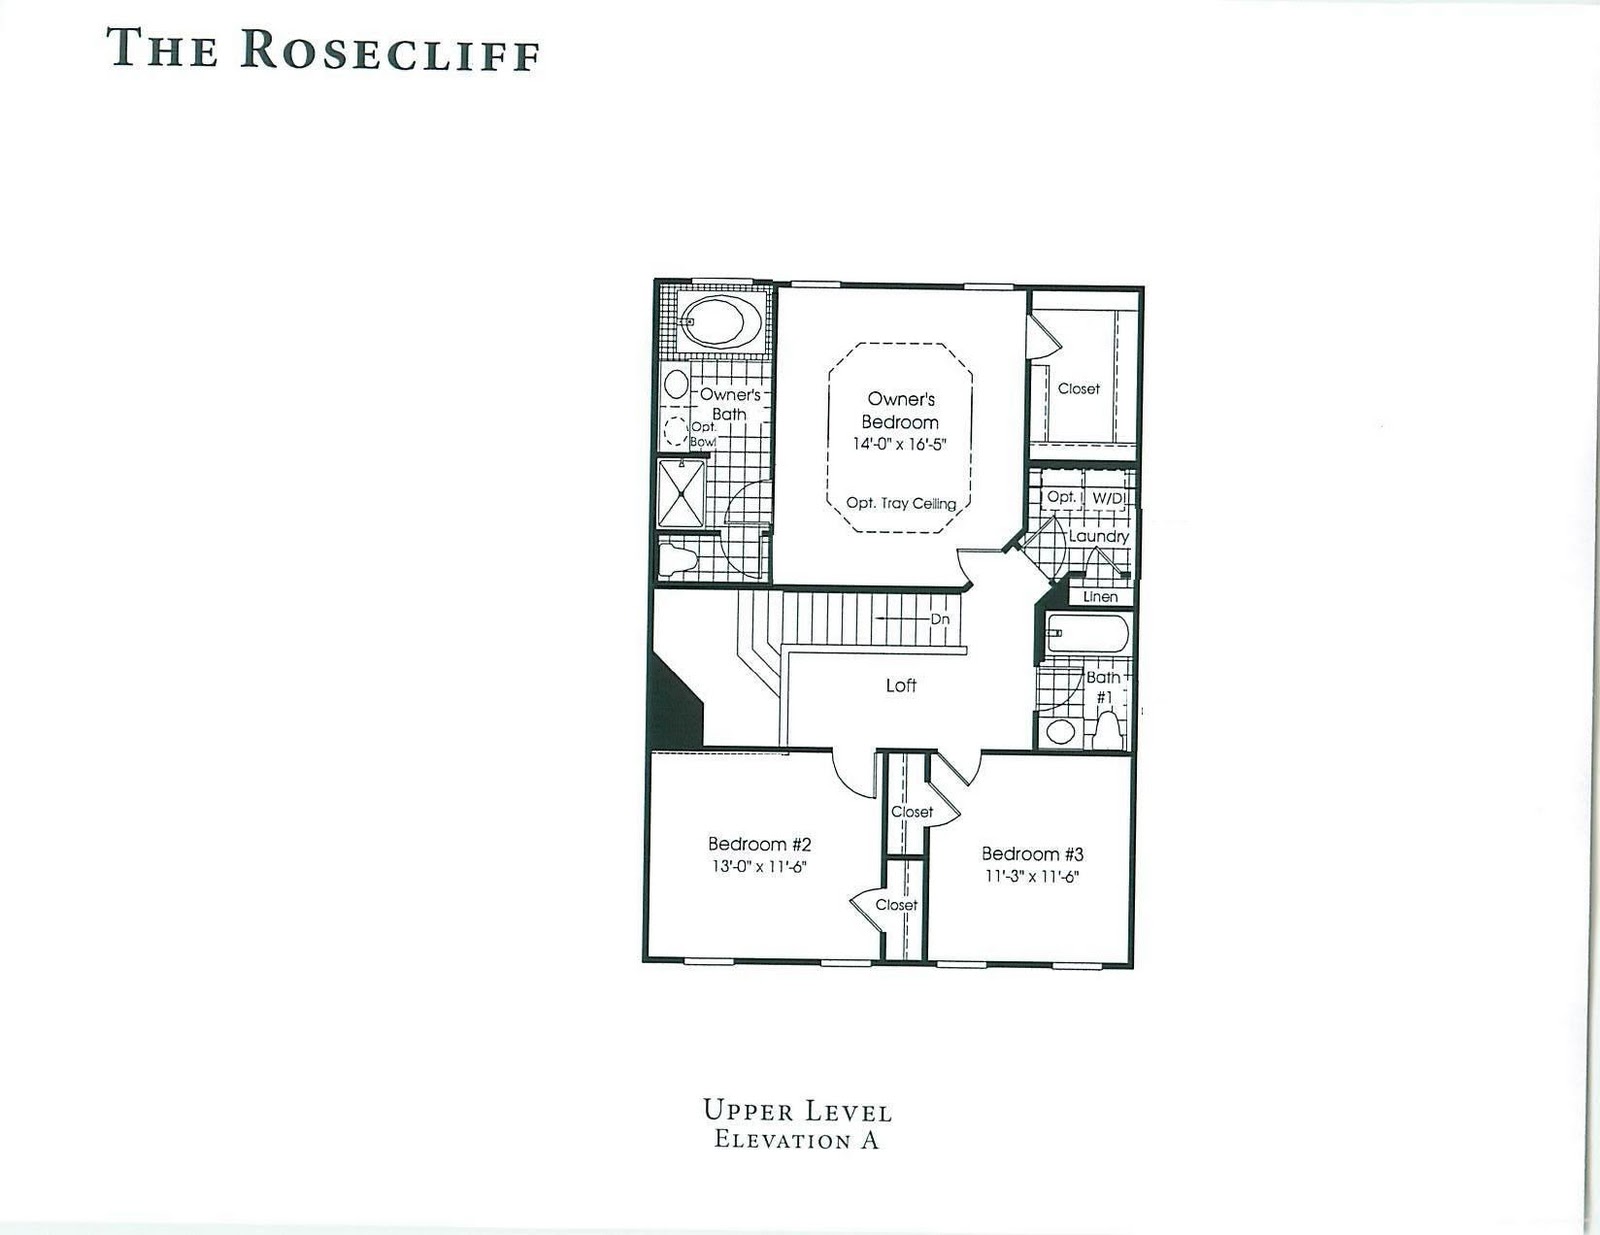 Building our Rosecliff Hacked up Floor Plan